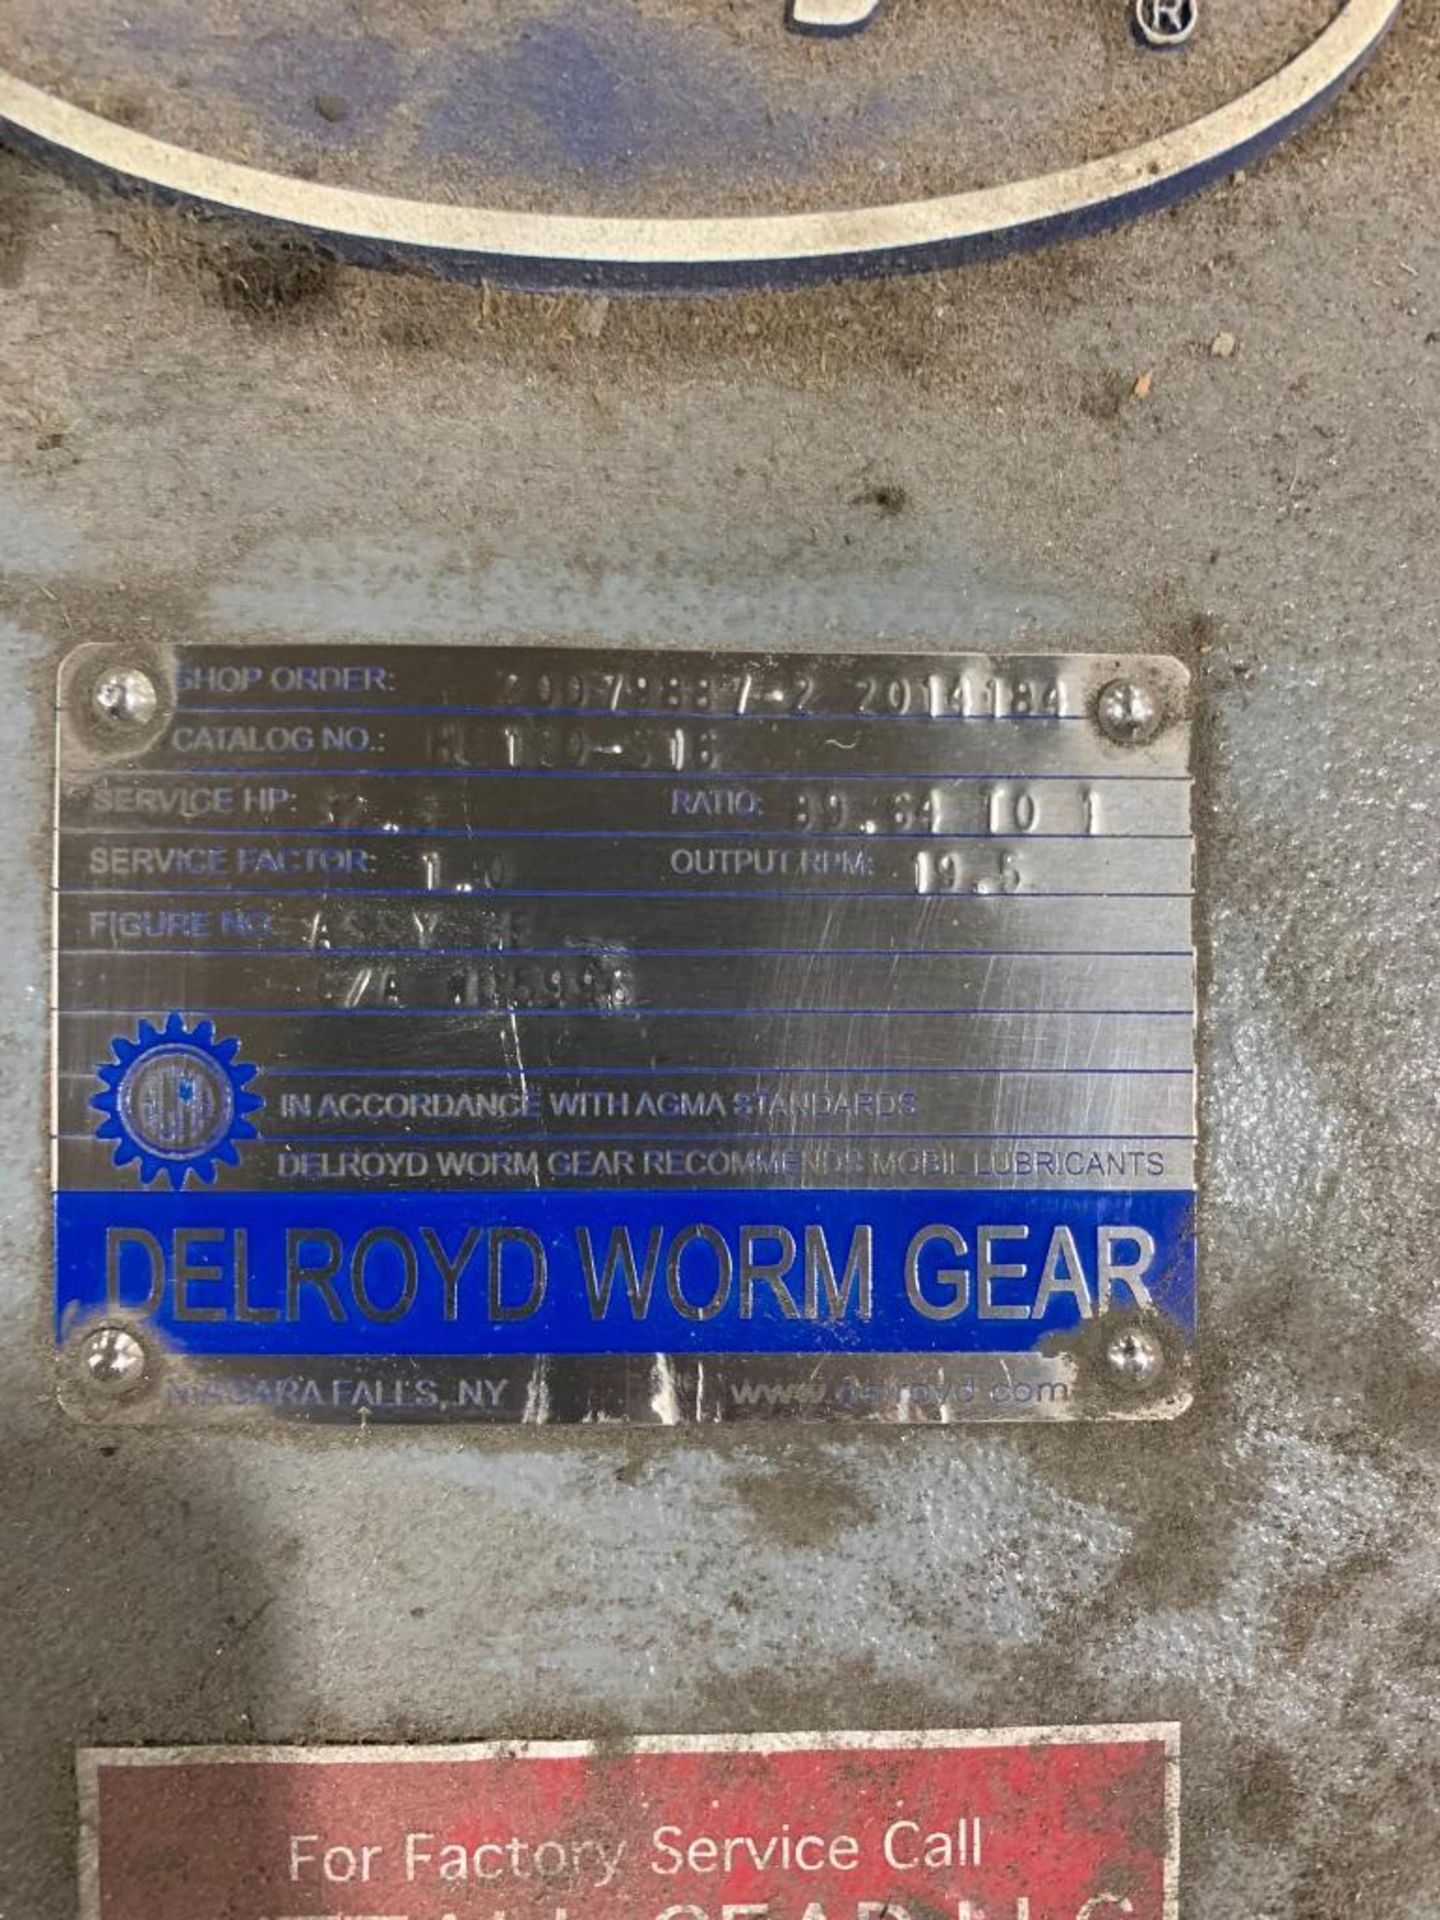 Delroyd Worm Gear, 32.3 Service HP, 19.5 OP RPM, 89.64:1 Ratio - Image 3 of 3